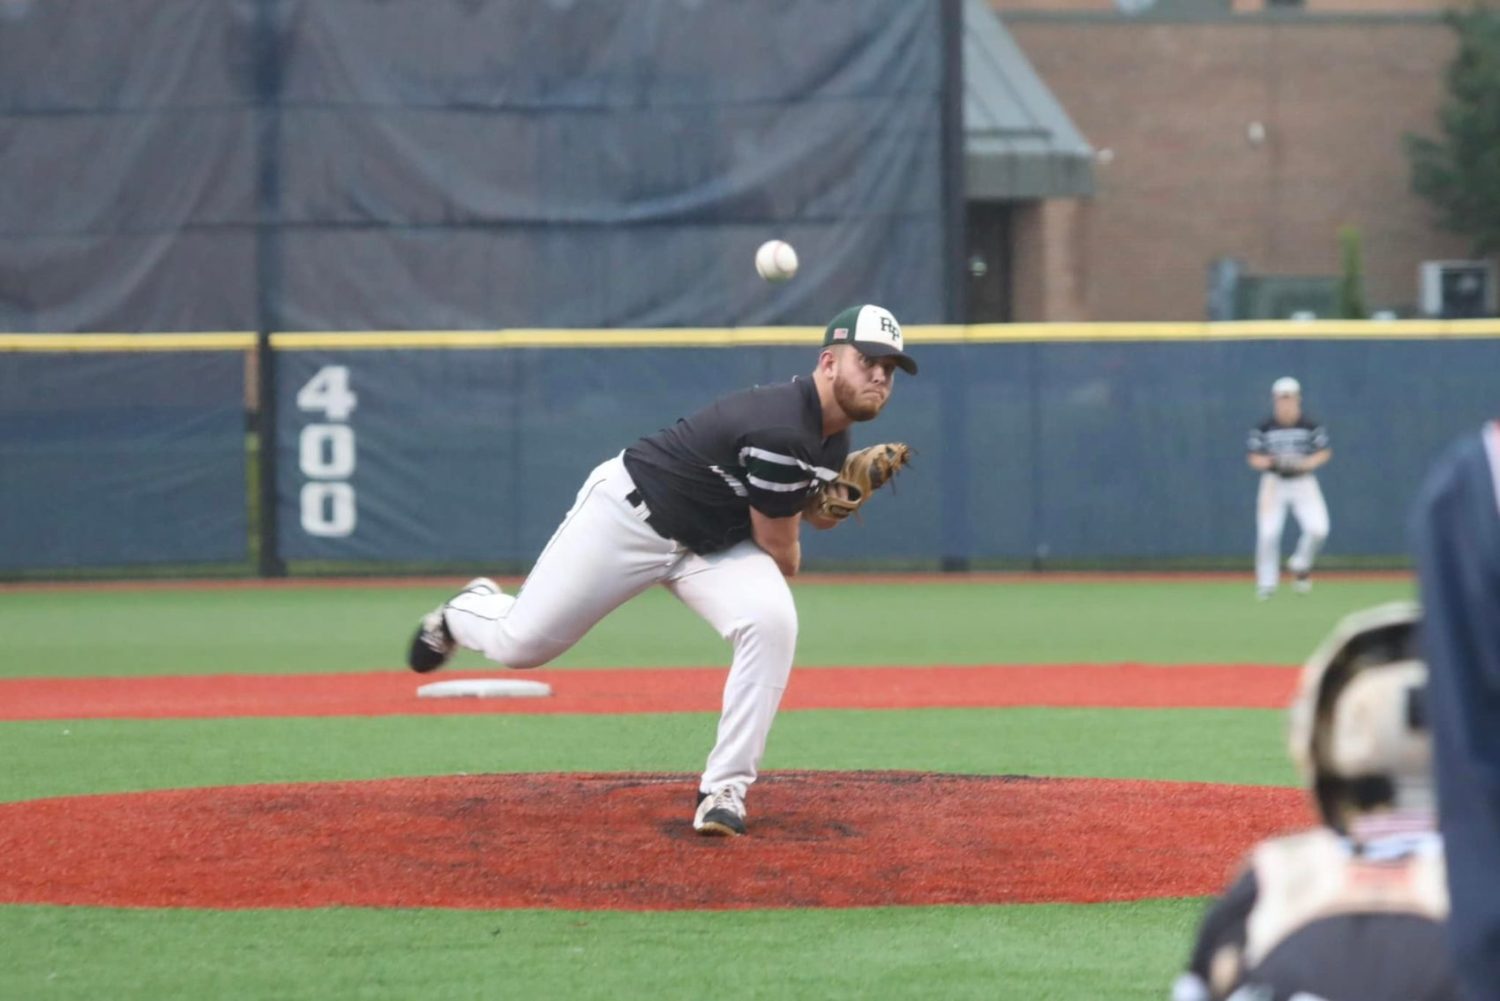 Reeths-Puffer falls to GR Forest Hills Northern in rain-soaked regional baseball action